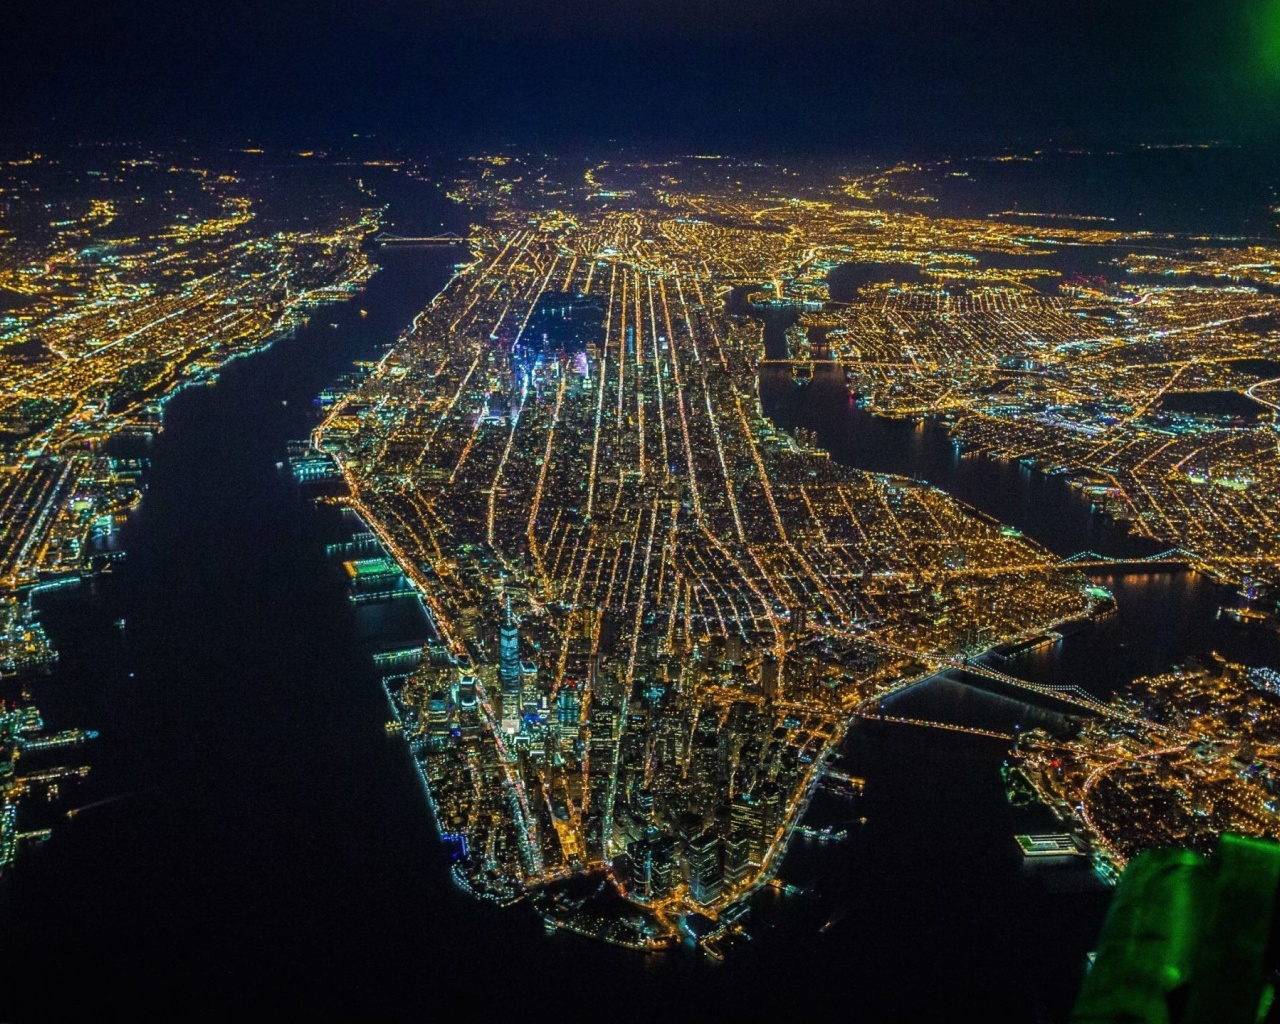 New York City Night View From Space wallpaper 1280x1024